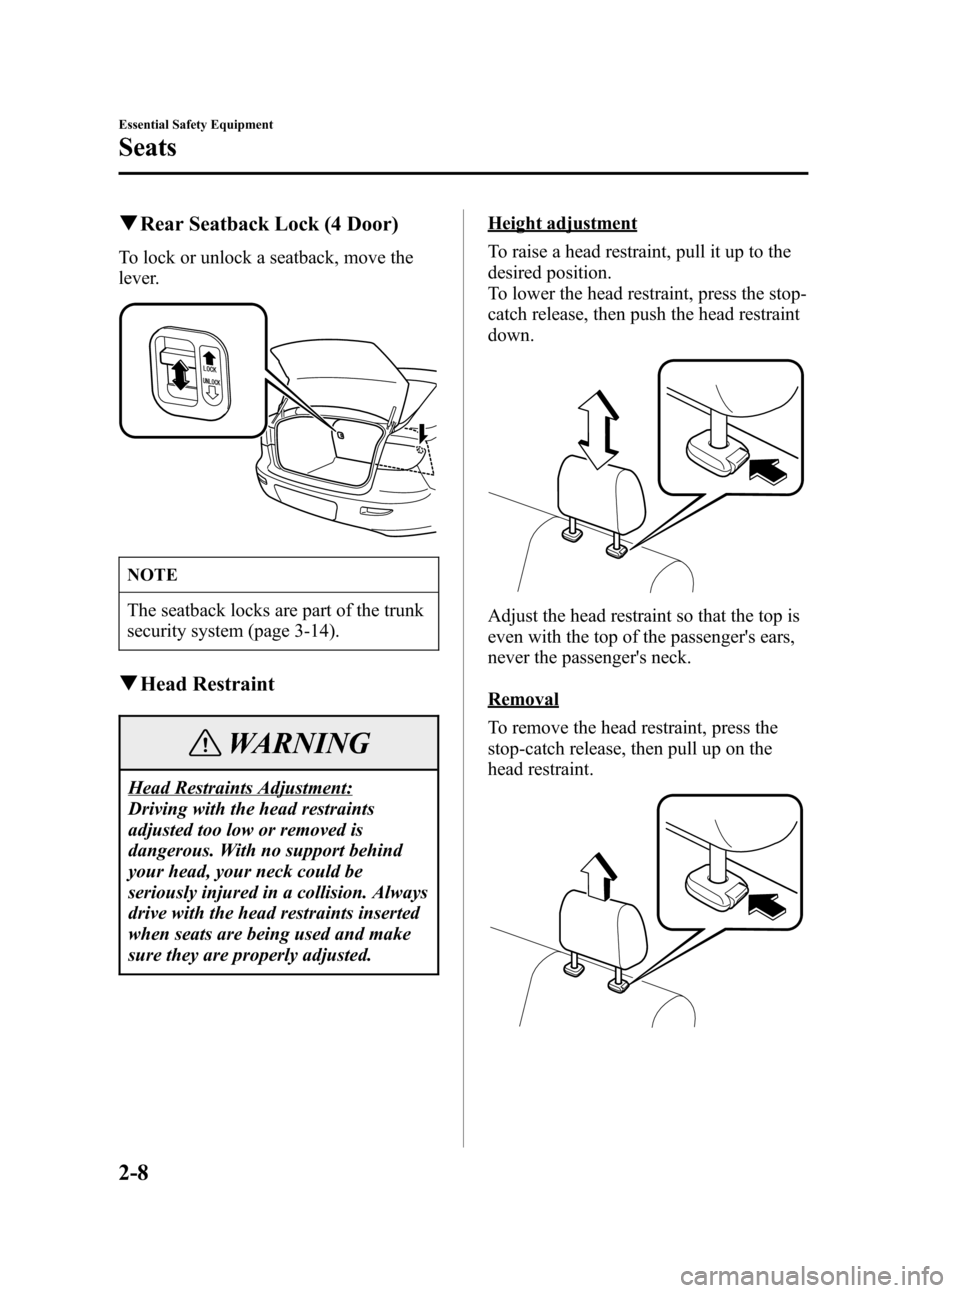 MAZDA MODEL 3 HATCHBACK 2006   (in English) Owners Guide Black plate (22,1)
qRear Seatback Lock (4 Door)
To lock or unlock a seatback, move the
lever.
NOTE
The seatback locks are part of the trunk
security system (page 3-14).
qHead Restraint
WARNING
Head Re